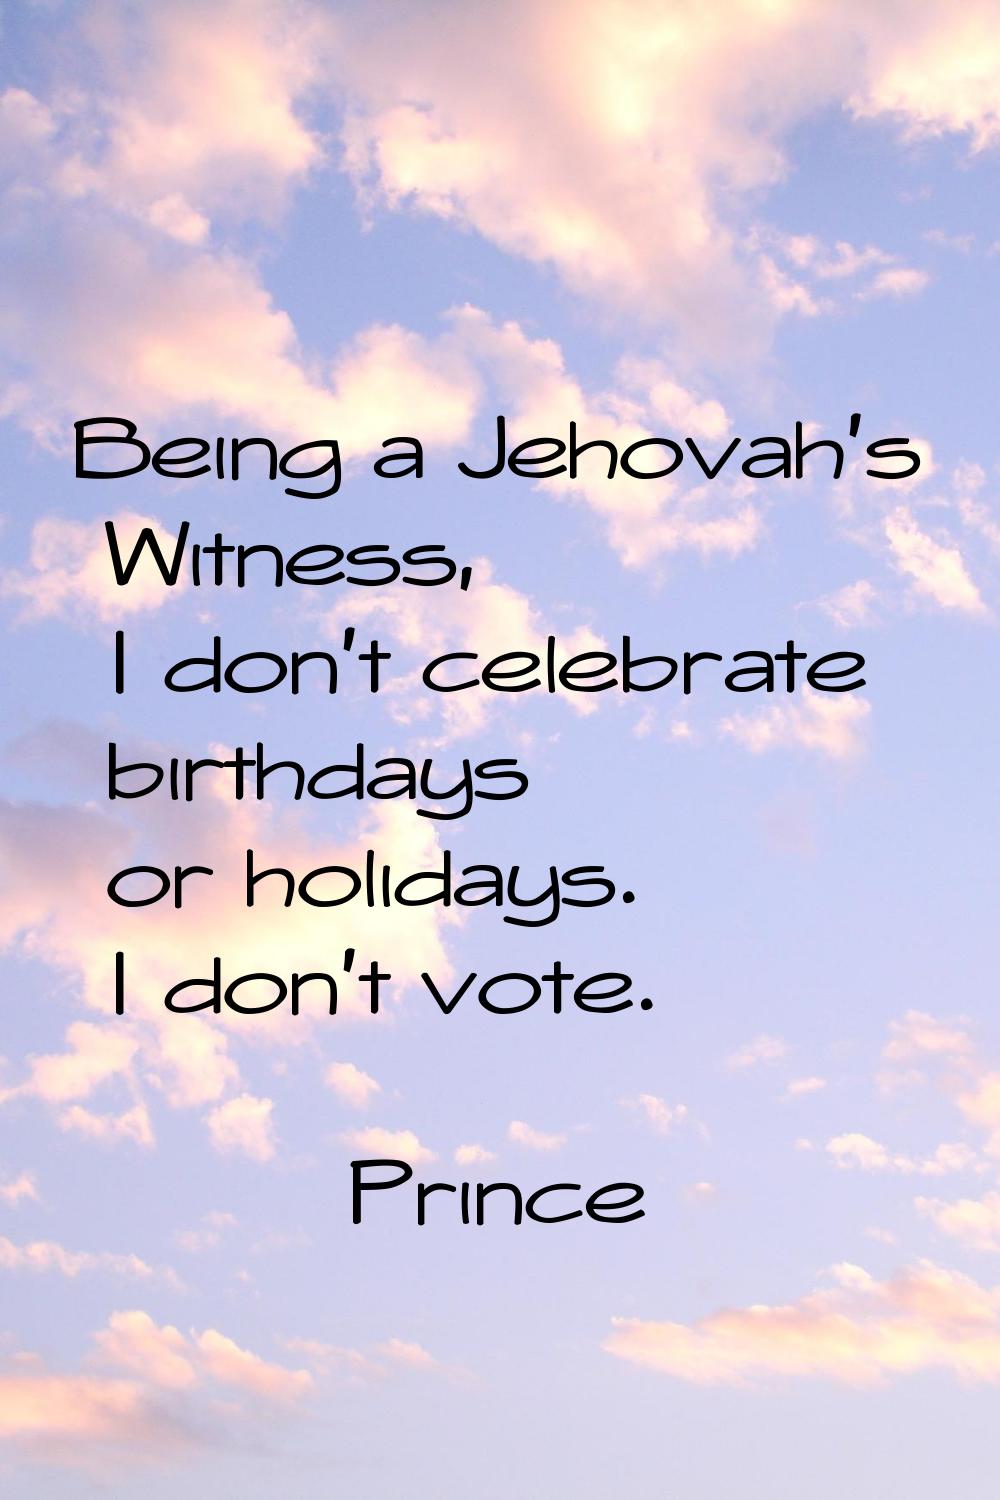 Being a Jehovah's Witness, I don't celebrate birthdays or holidays. I don't vote.